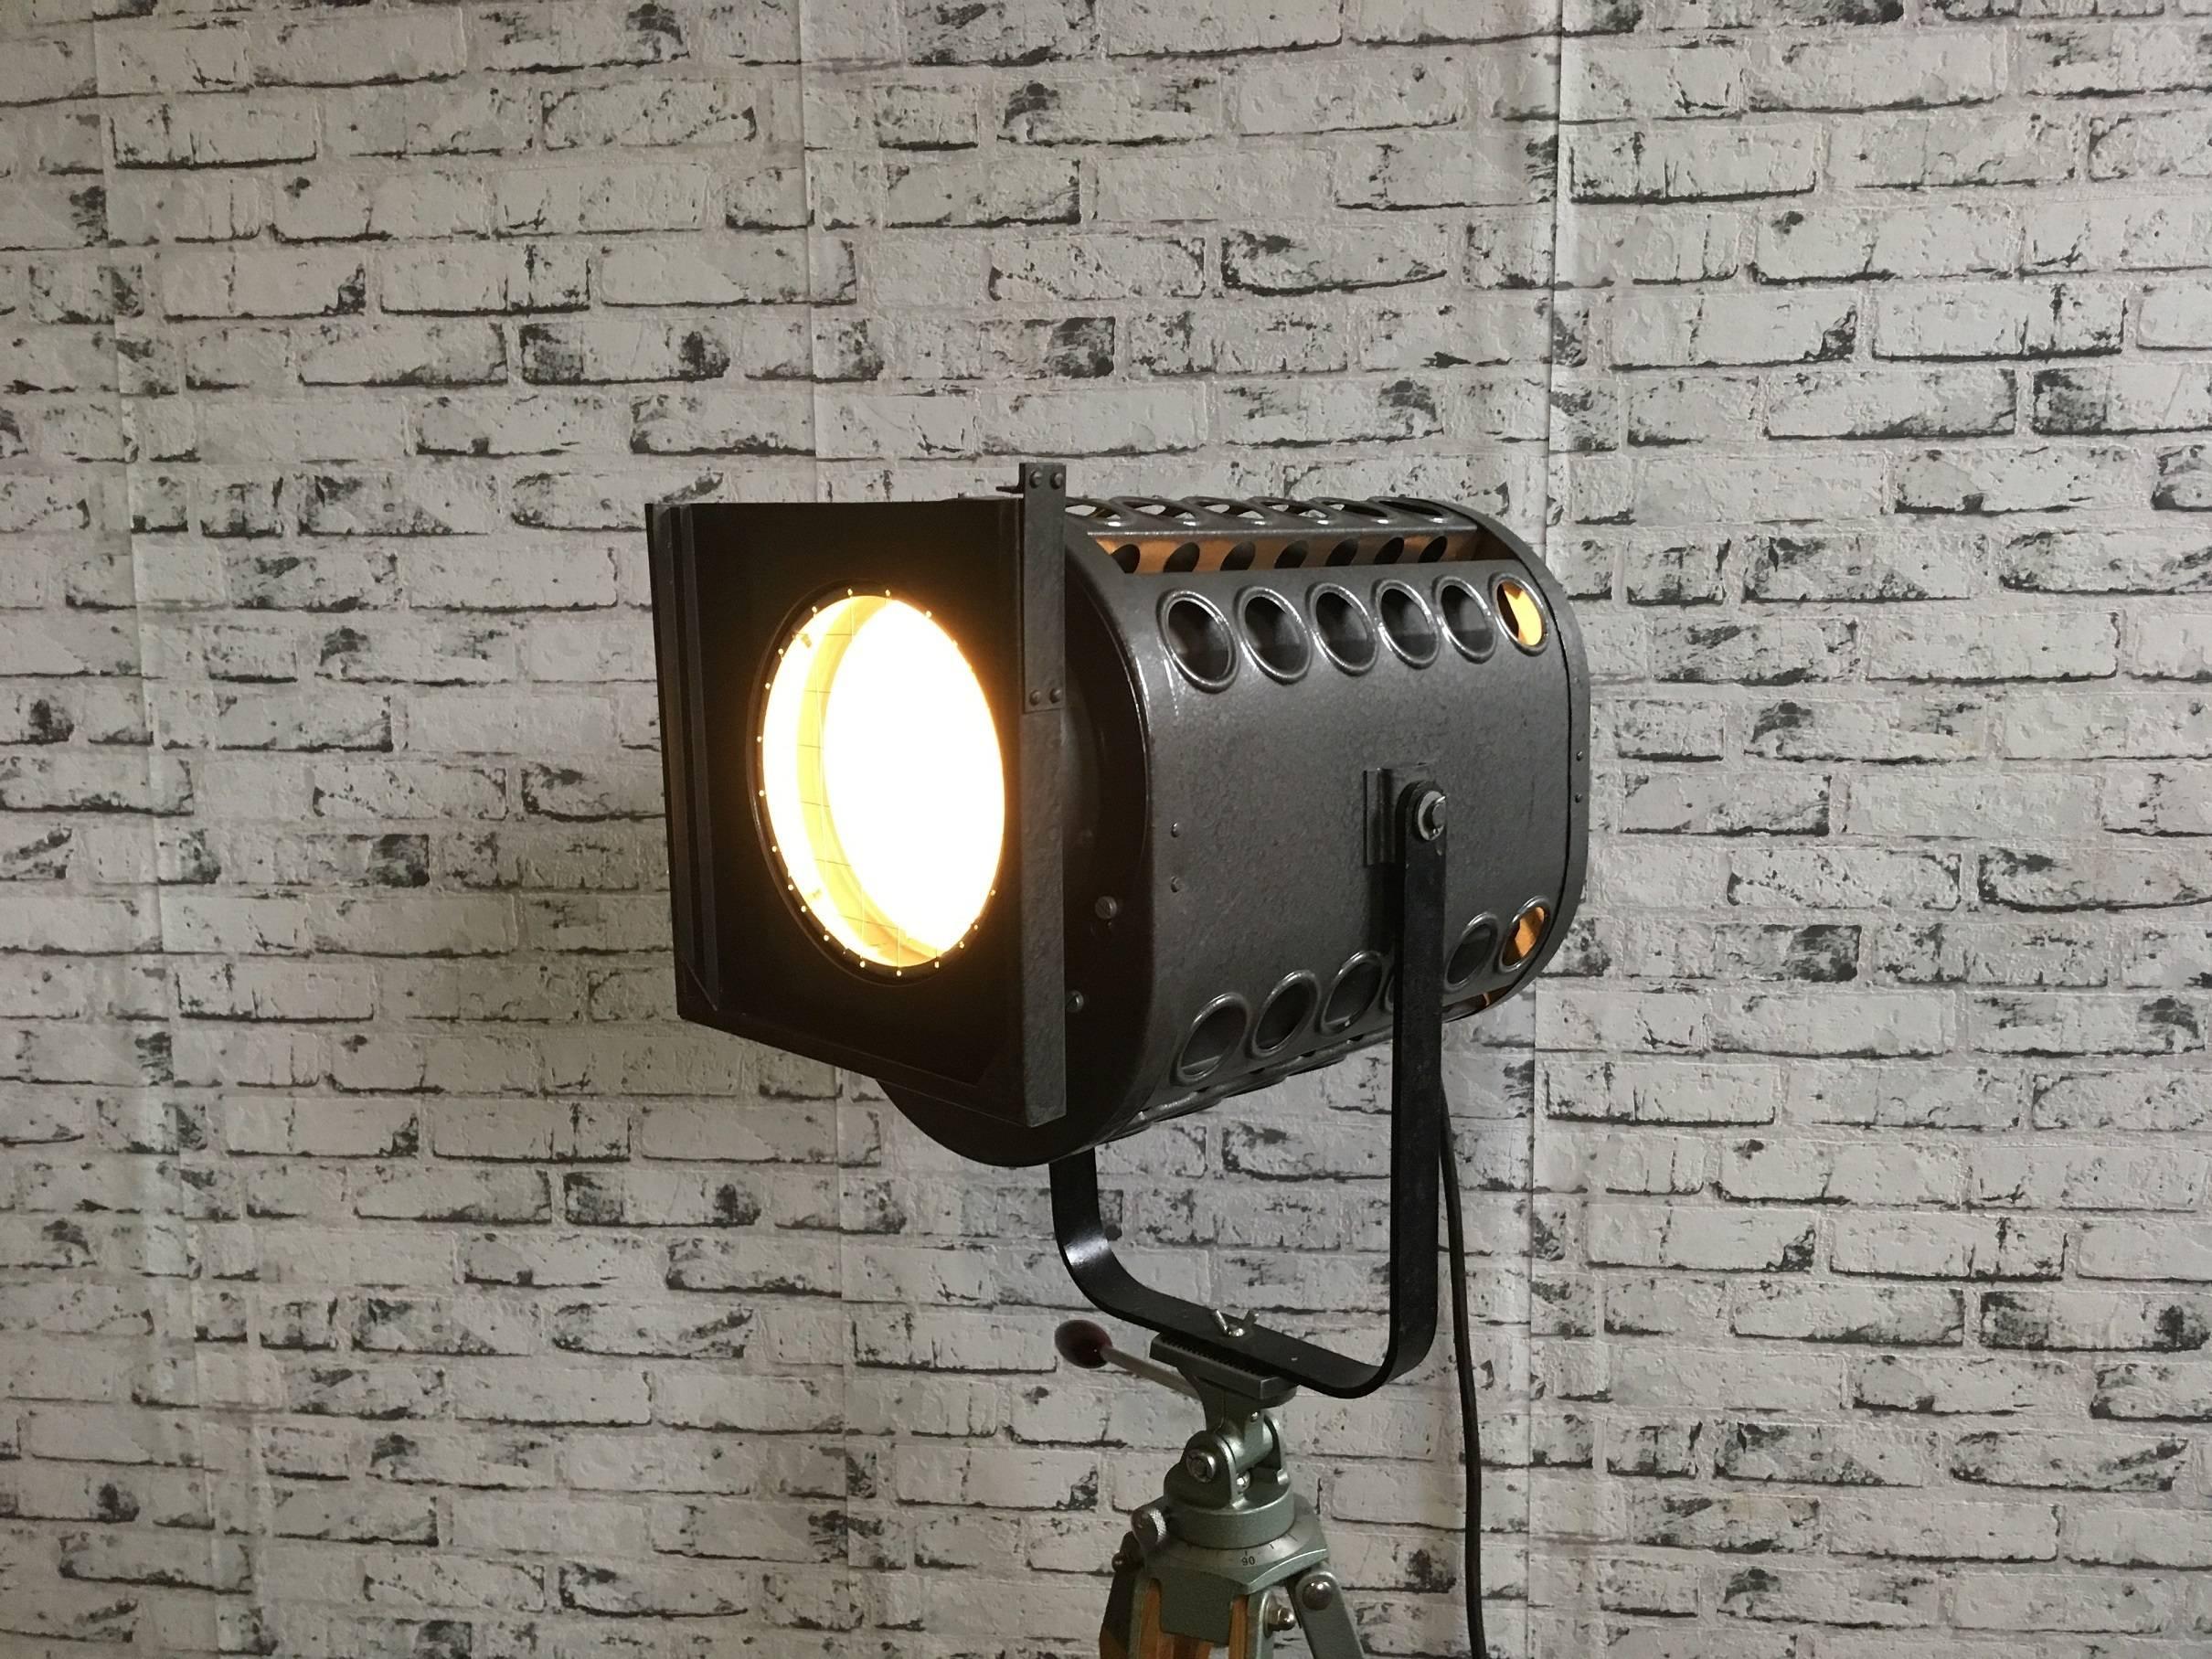 This theater spotlight stands on a tripod and was produced in the Czech Republic during the 1960s.
Material: Iron, wood
Color
Black, brown
Depth
47 cm
Height
117 cm
Diameter
22 cm.